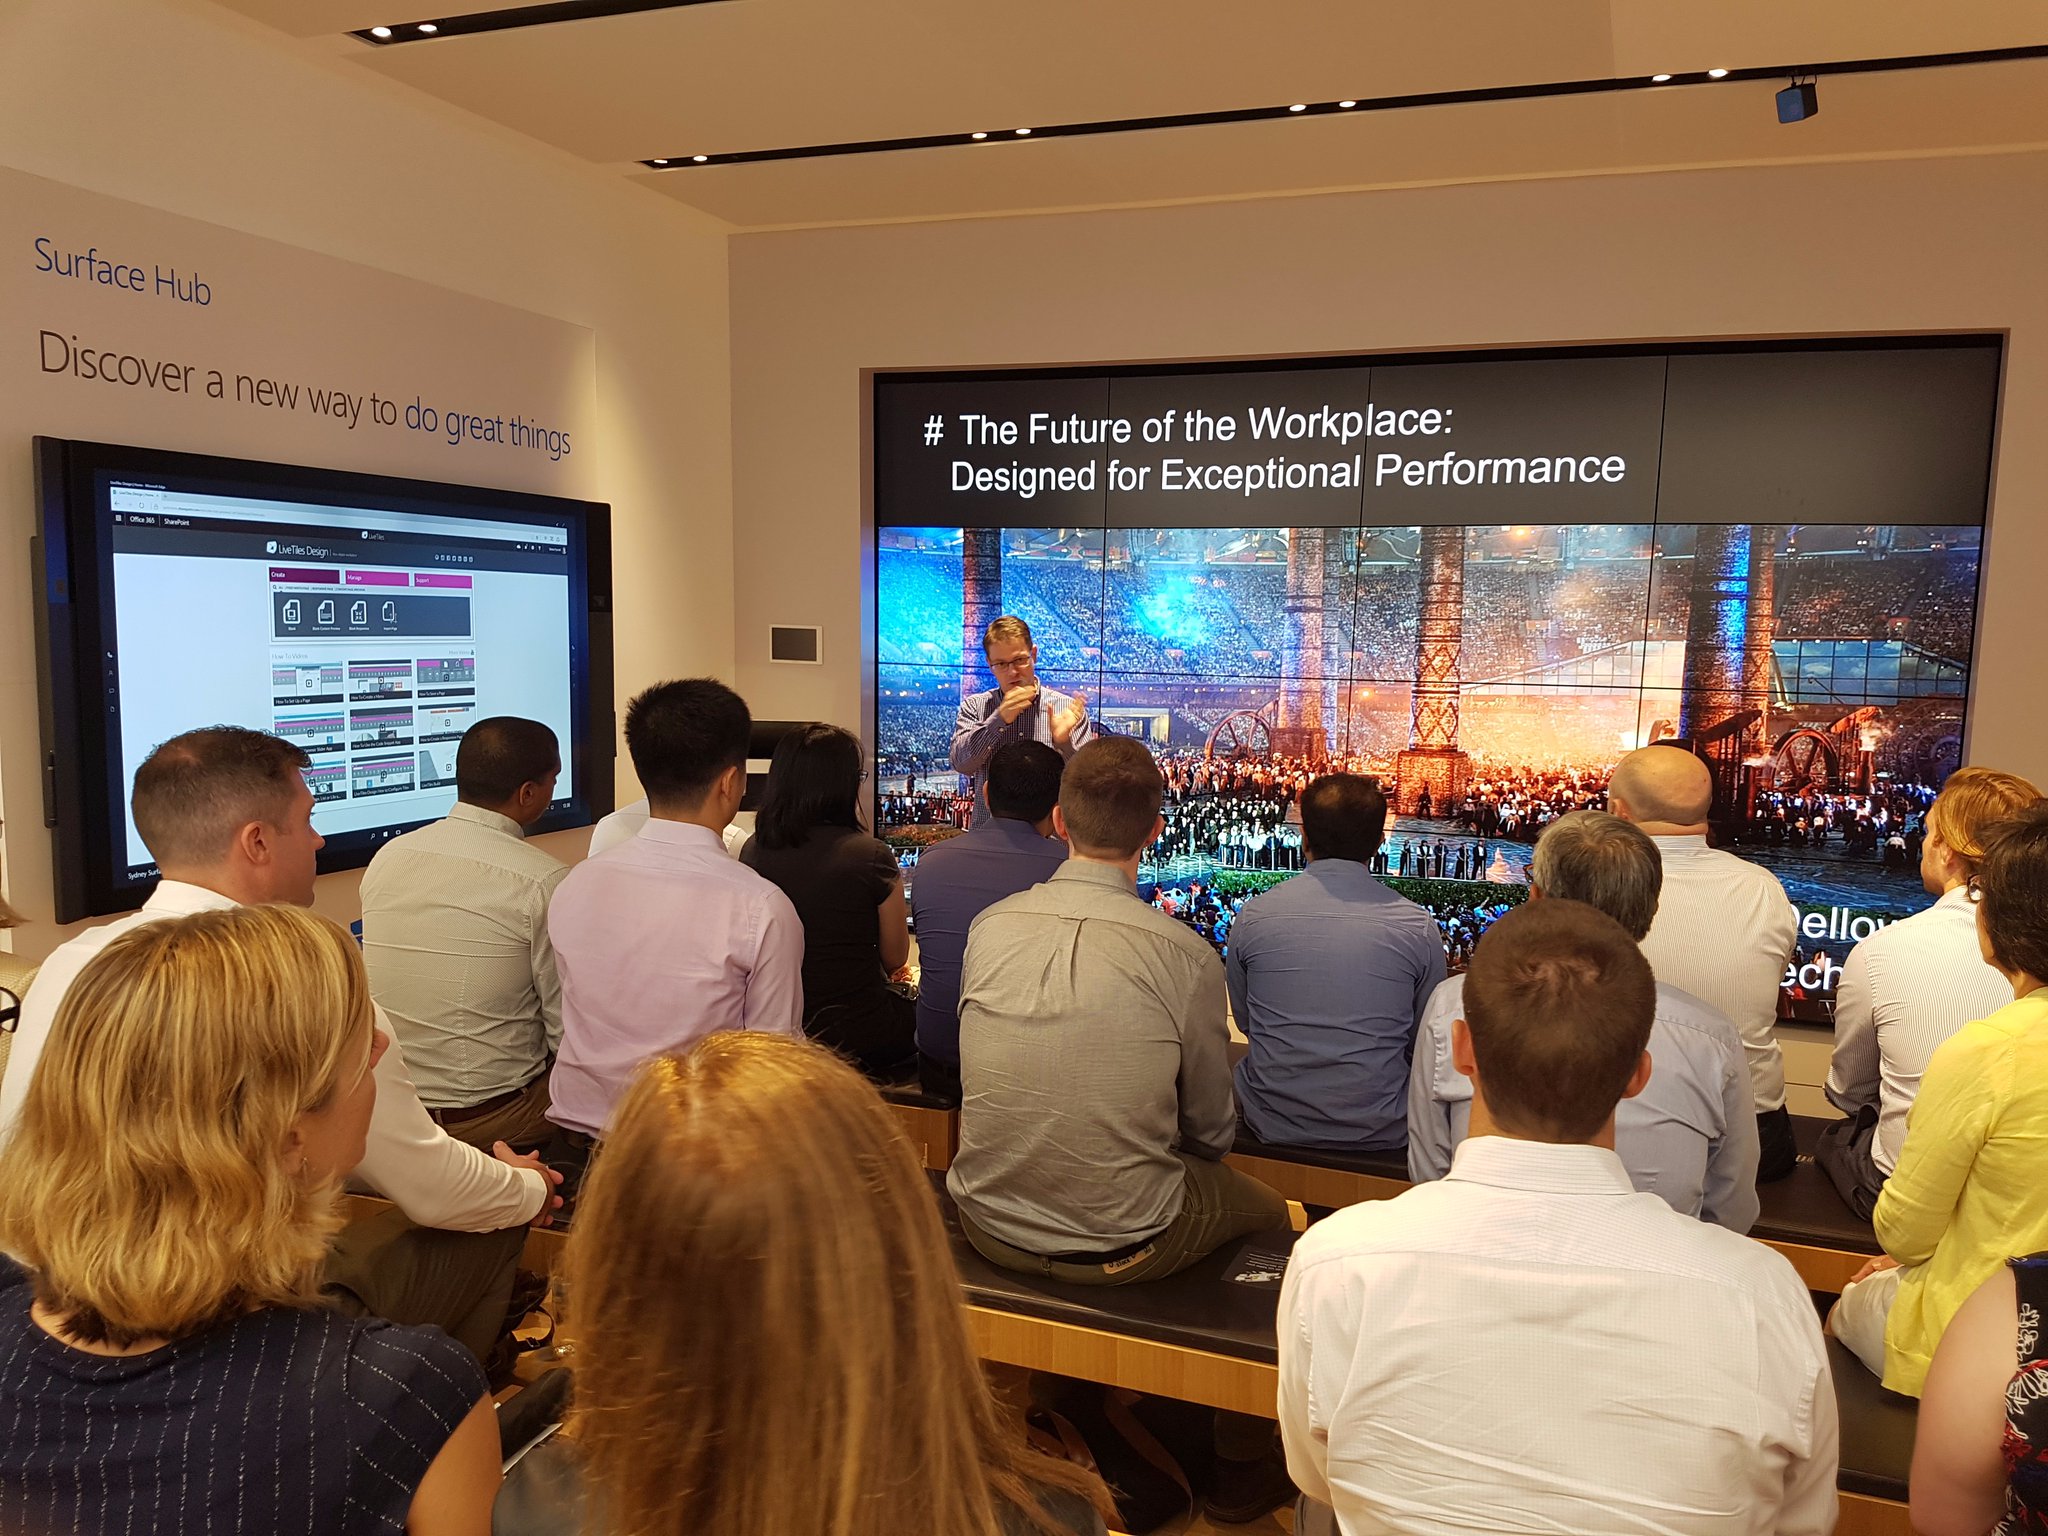 James Dellow presenting at the Microsoft Store in Sydney. Image credit: LiveTiles.